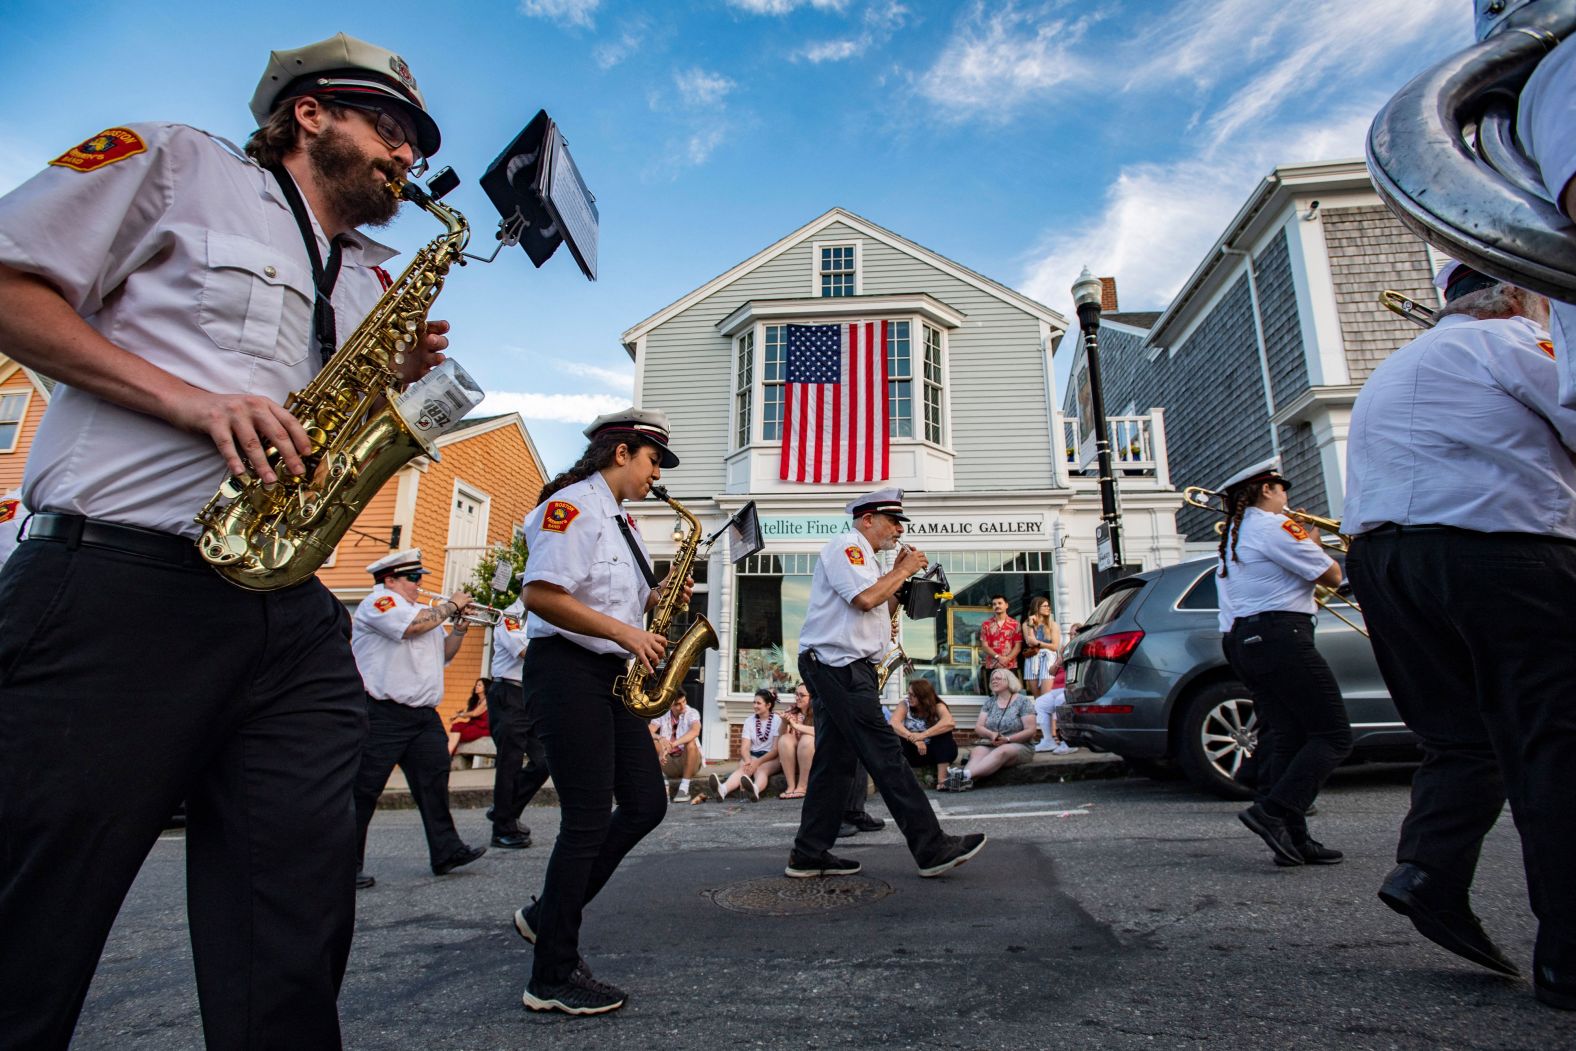 A marching band during the Fireman's Parade in Rockport, Massachusetts, Monday. This is the first time the annual parade has been held since 2019.